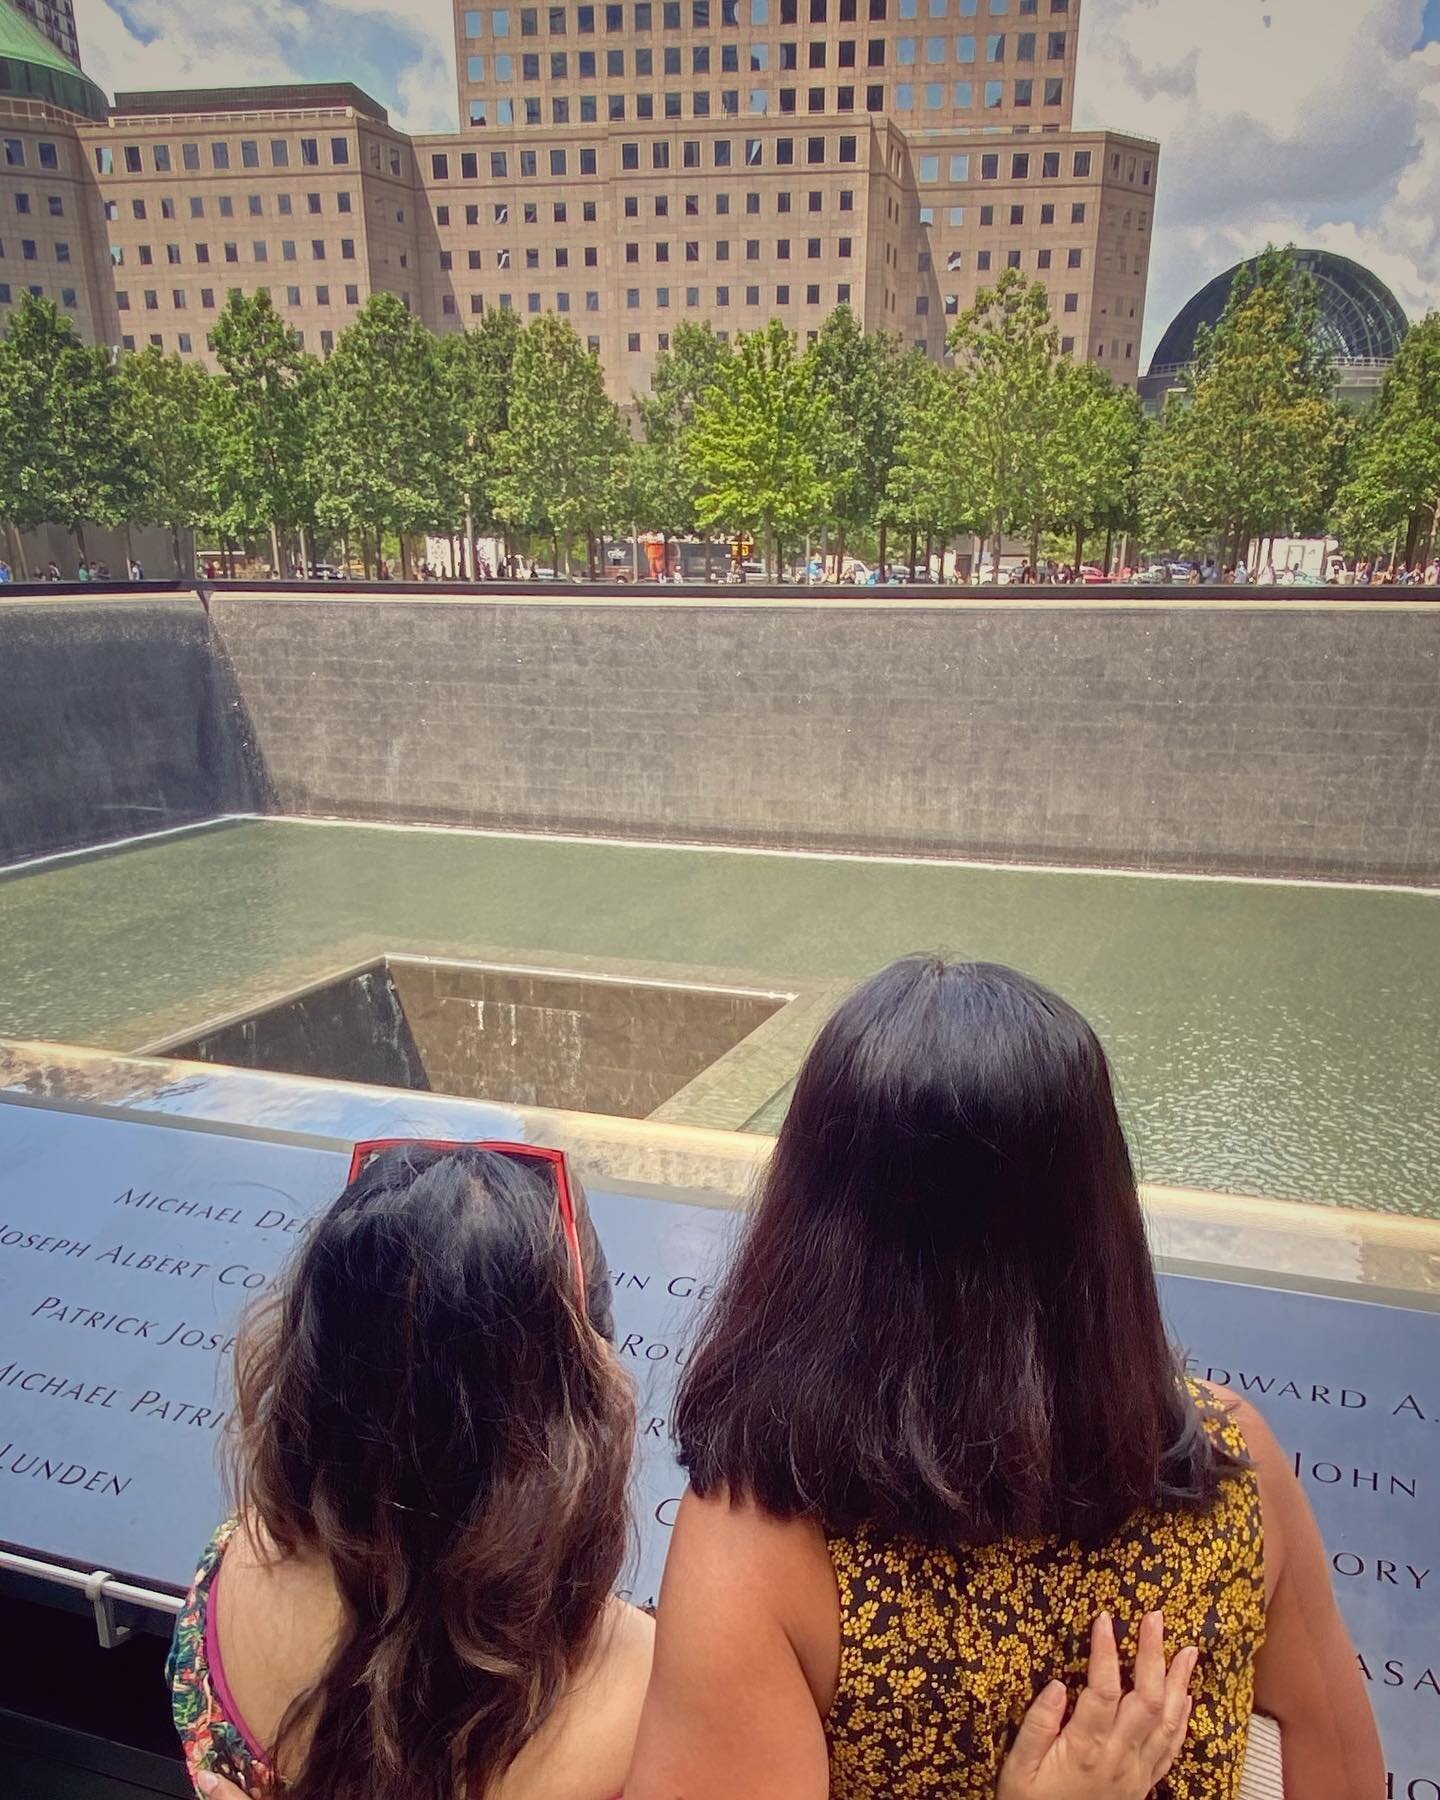 We never know how significant a moment or experience will be until time creates a greater meaning. 

The last time @yvonnetderuna and I were visiting the World Trade Center was mid-August 2001. I had only moved out here from California less than two 